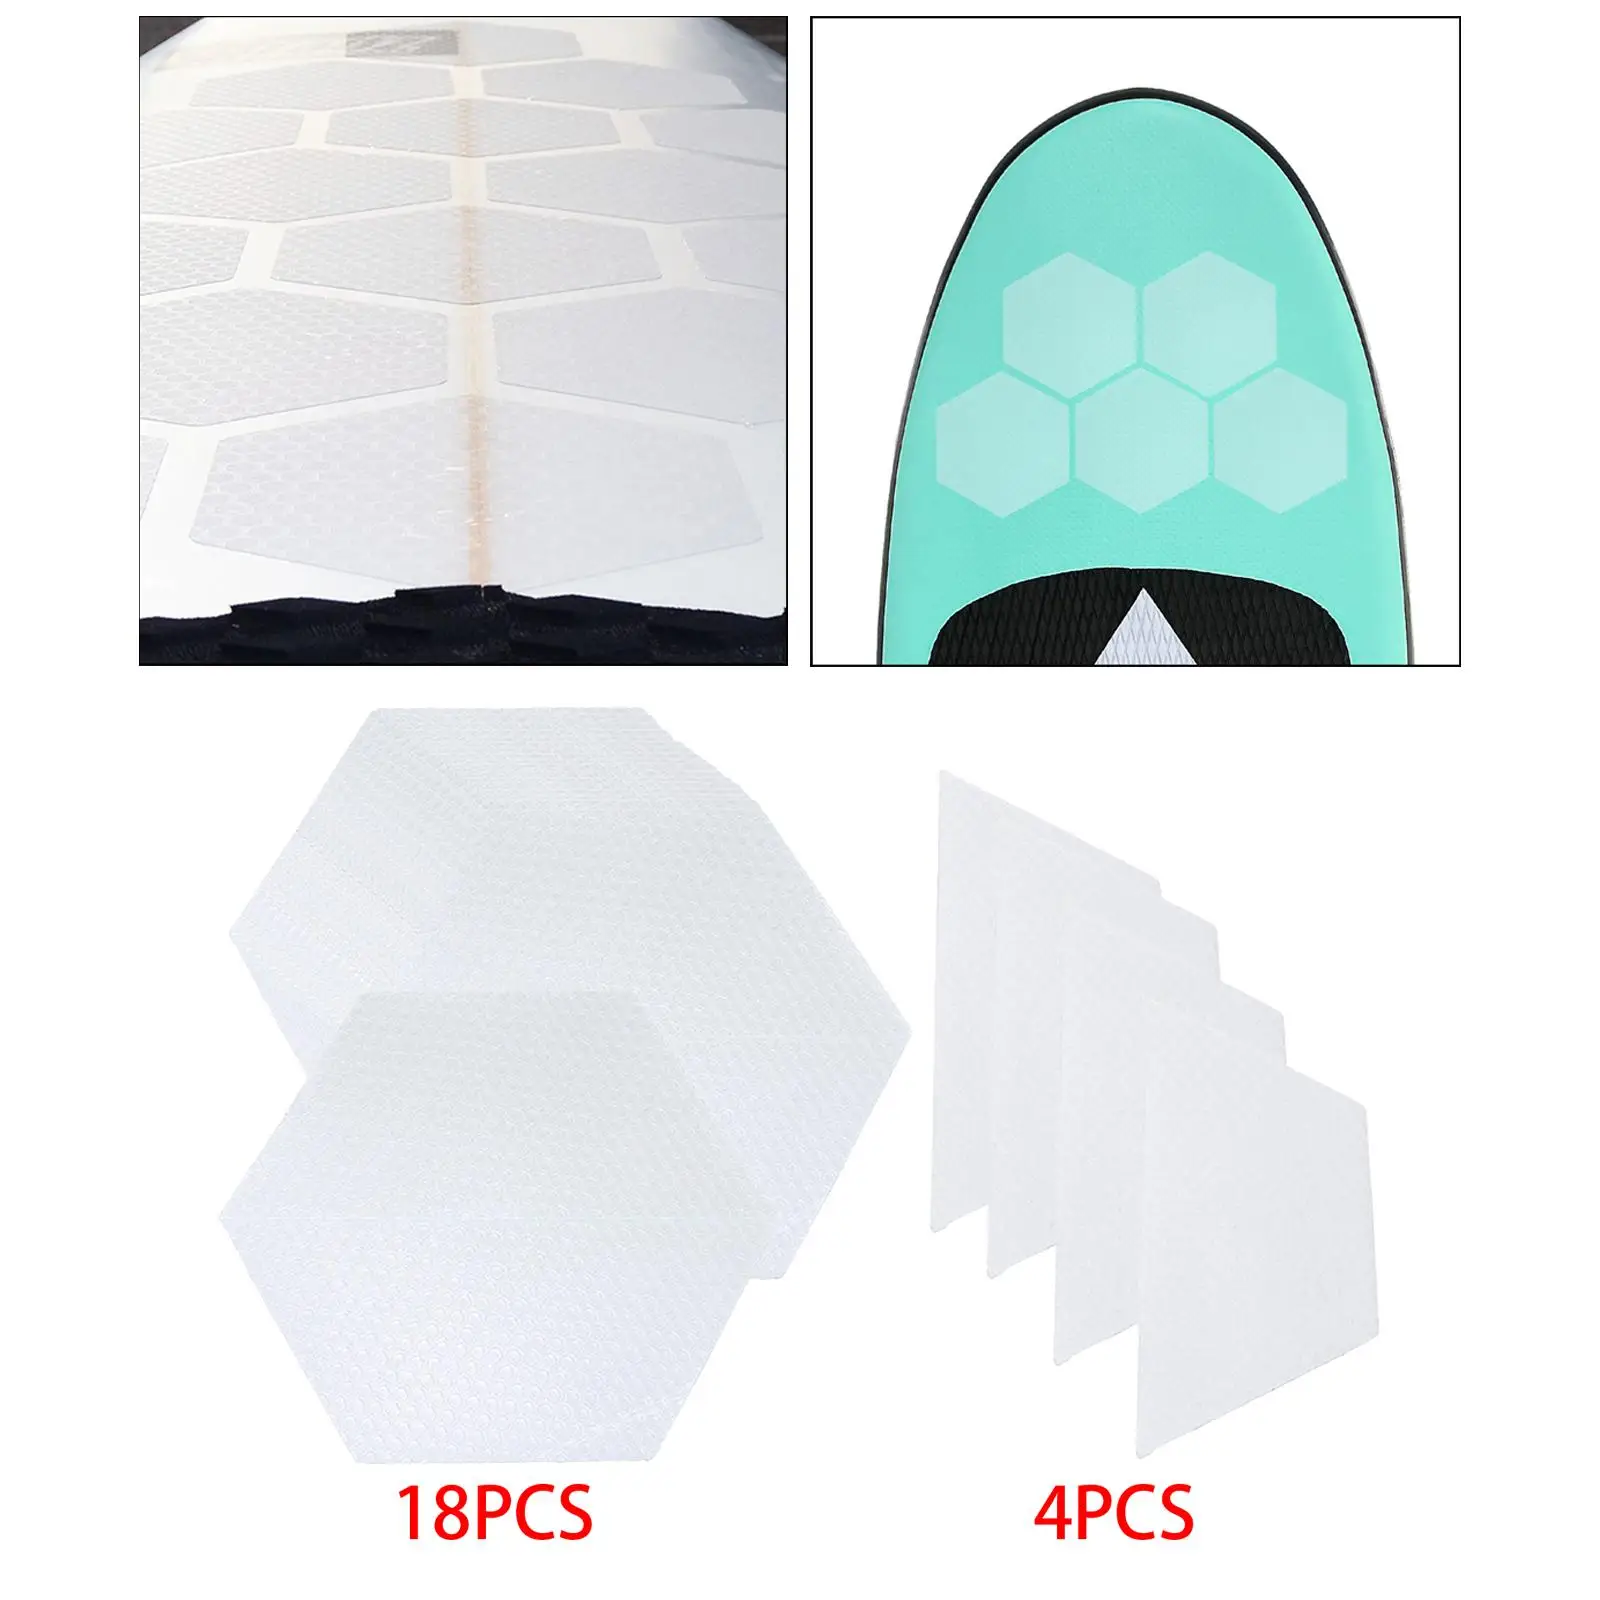 Adhesive Hexagon Surfboard Pads Waxless Surfing Accessory Surf Deck Pads